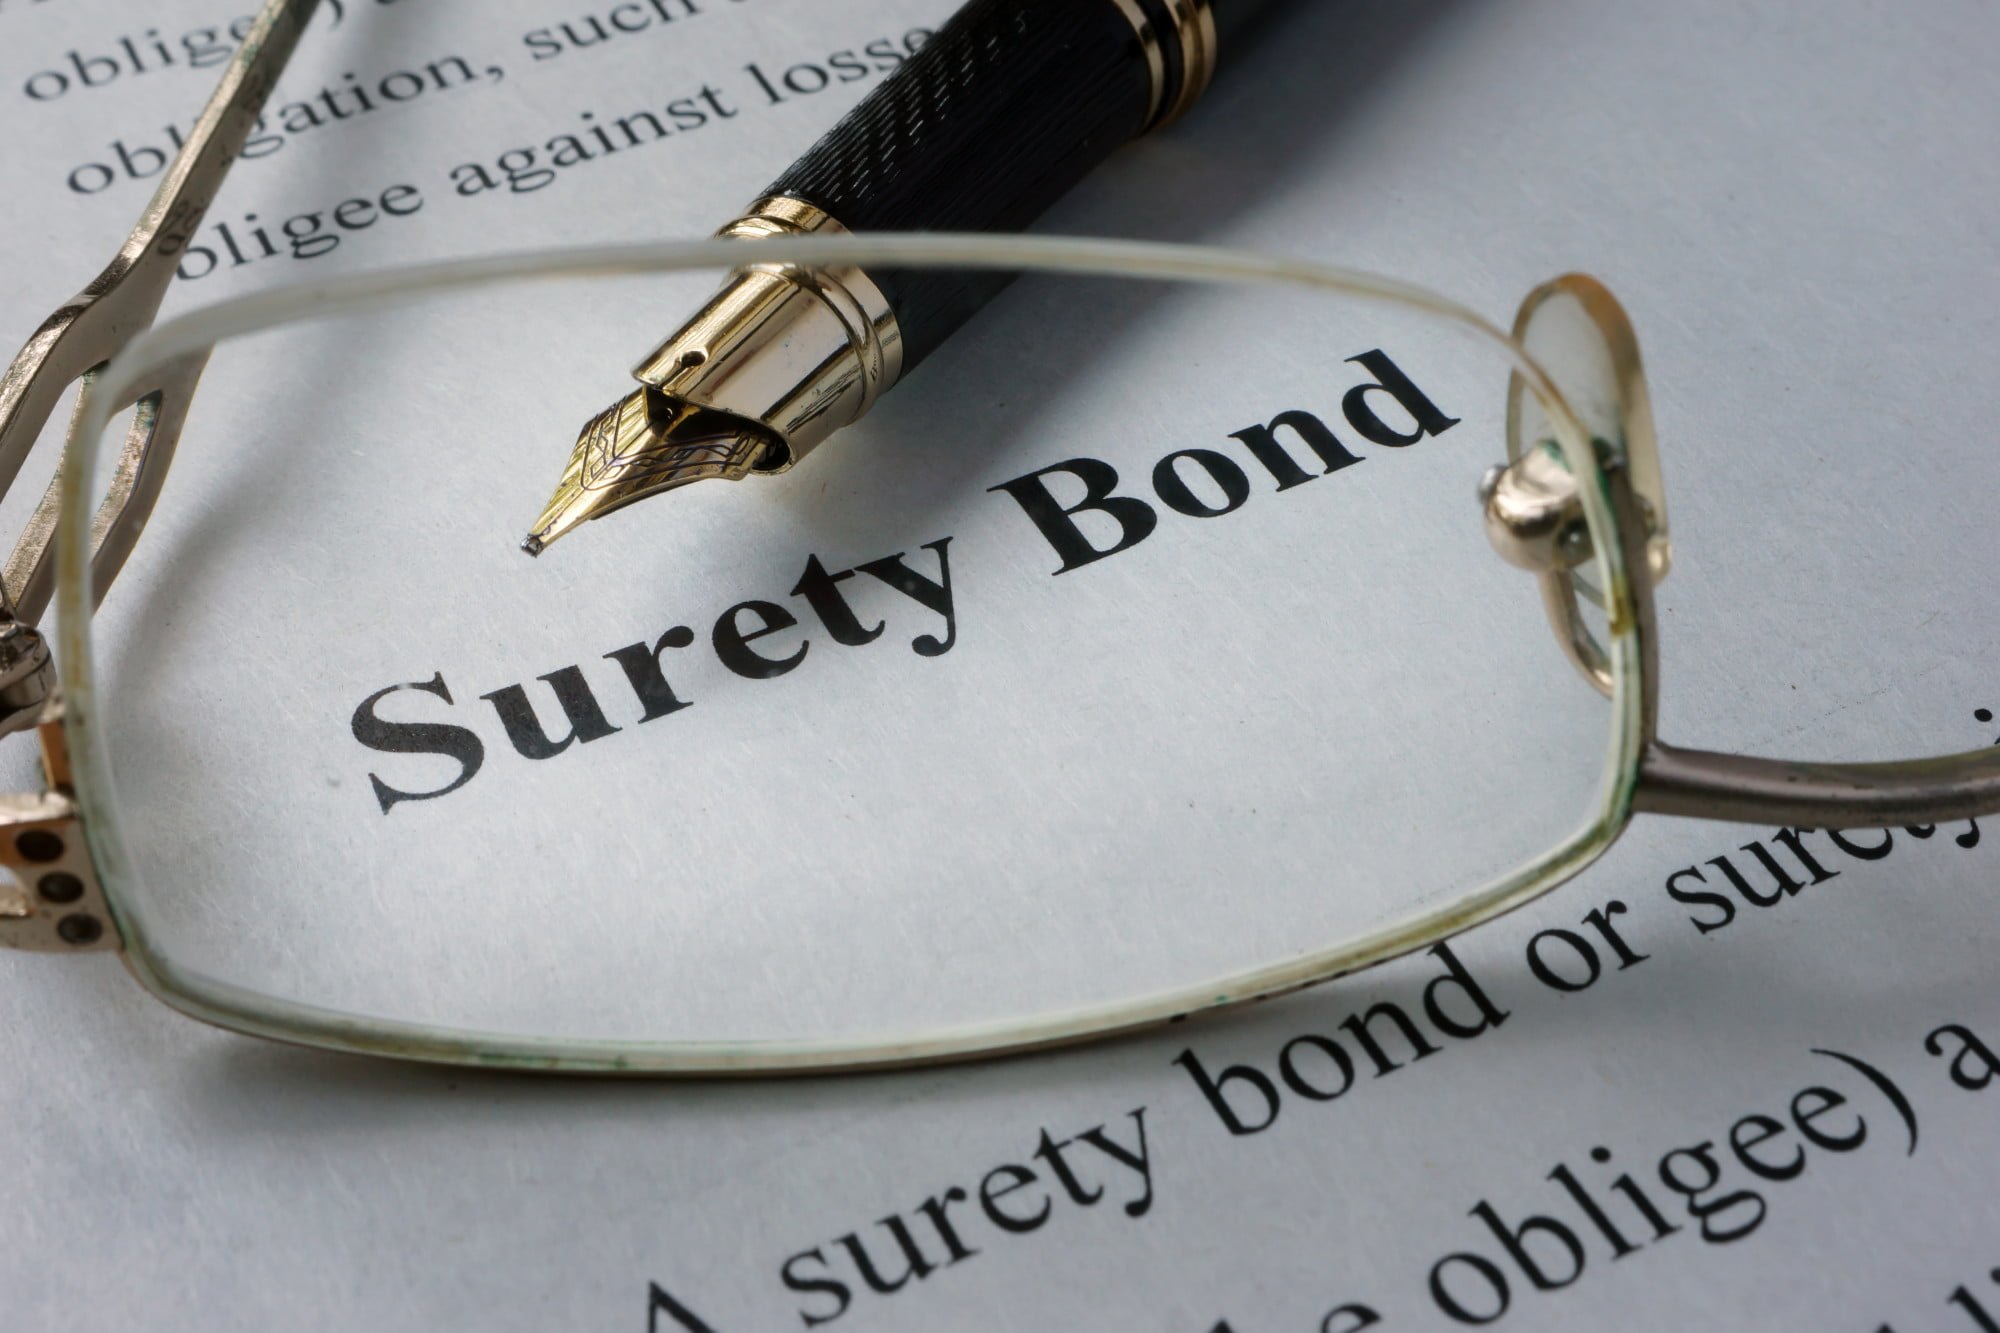 Fidelity bond vs surety bond: How much do you know about the differences between the two? Read on to learn more about the differences between them.